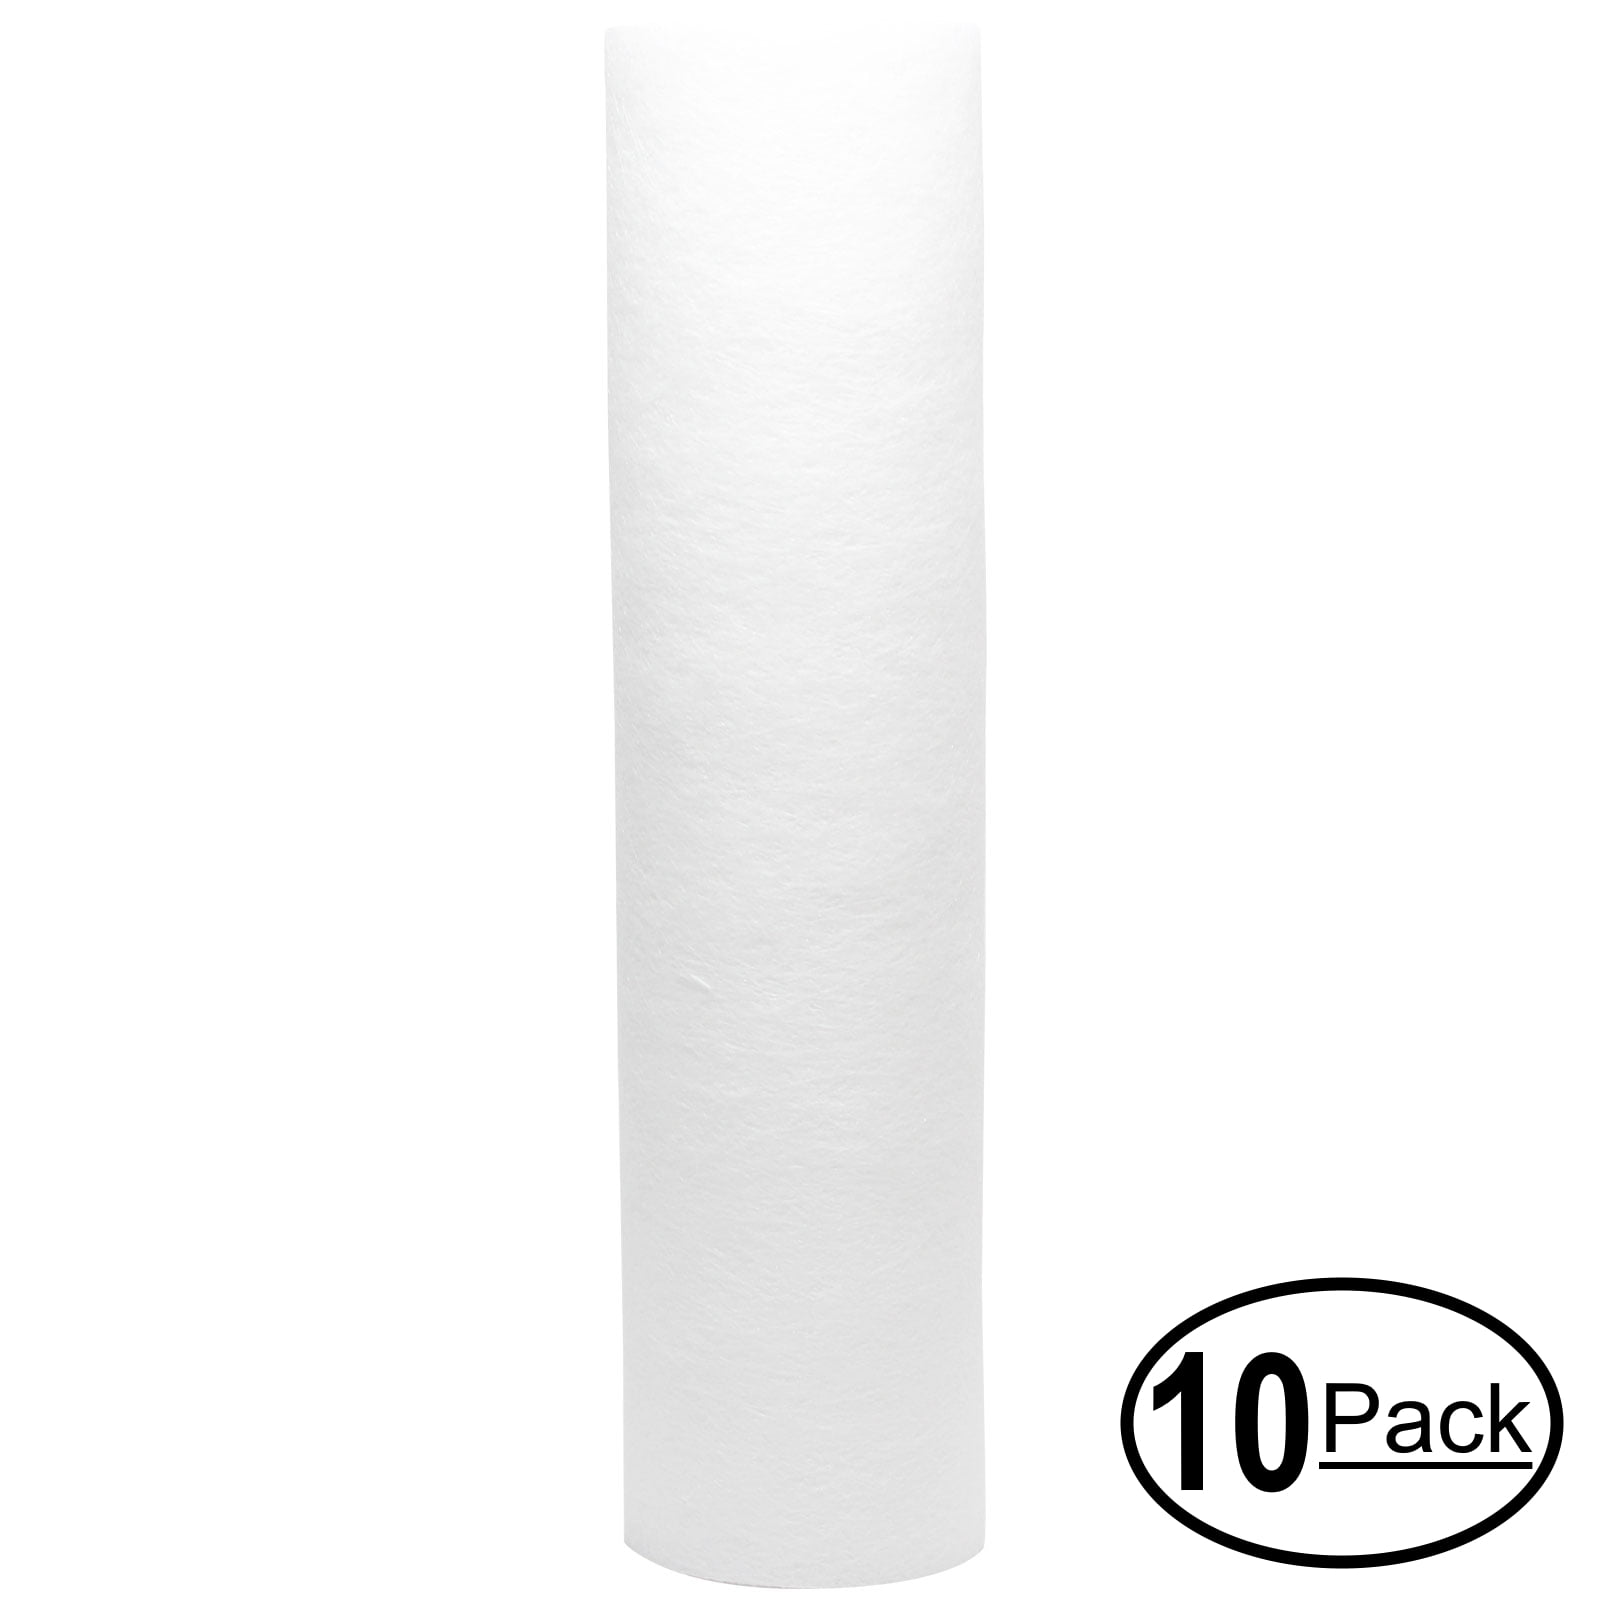 Universal 50 Pack 5-micron 10-Inch by 2.5-Inch Sediment Filter Cartridges 10"x2 